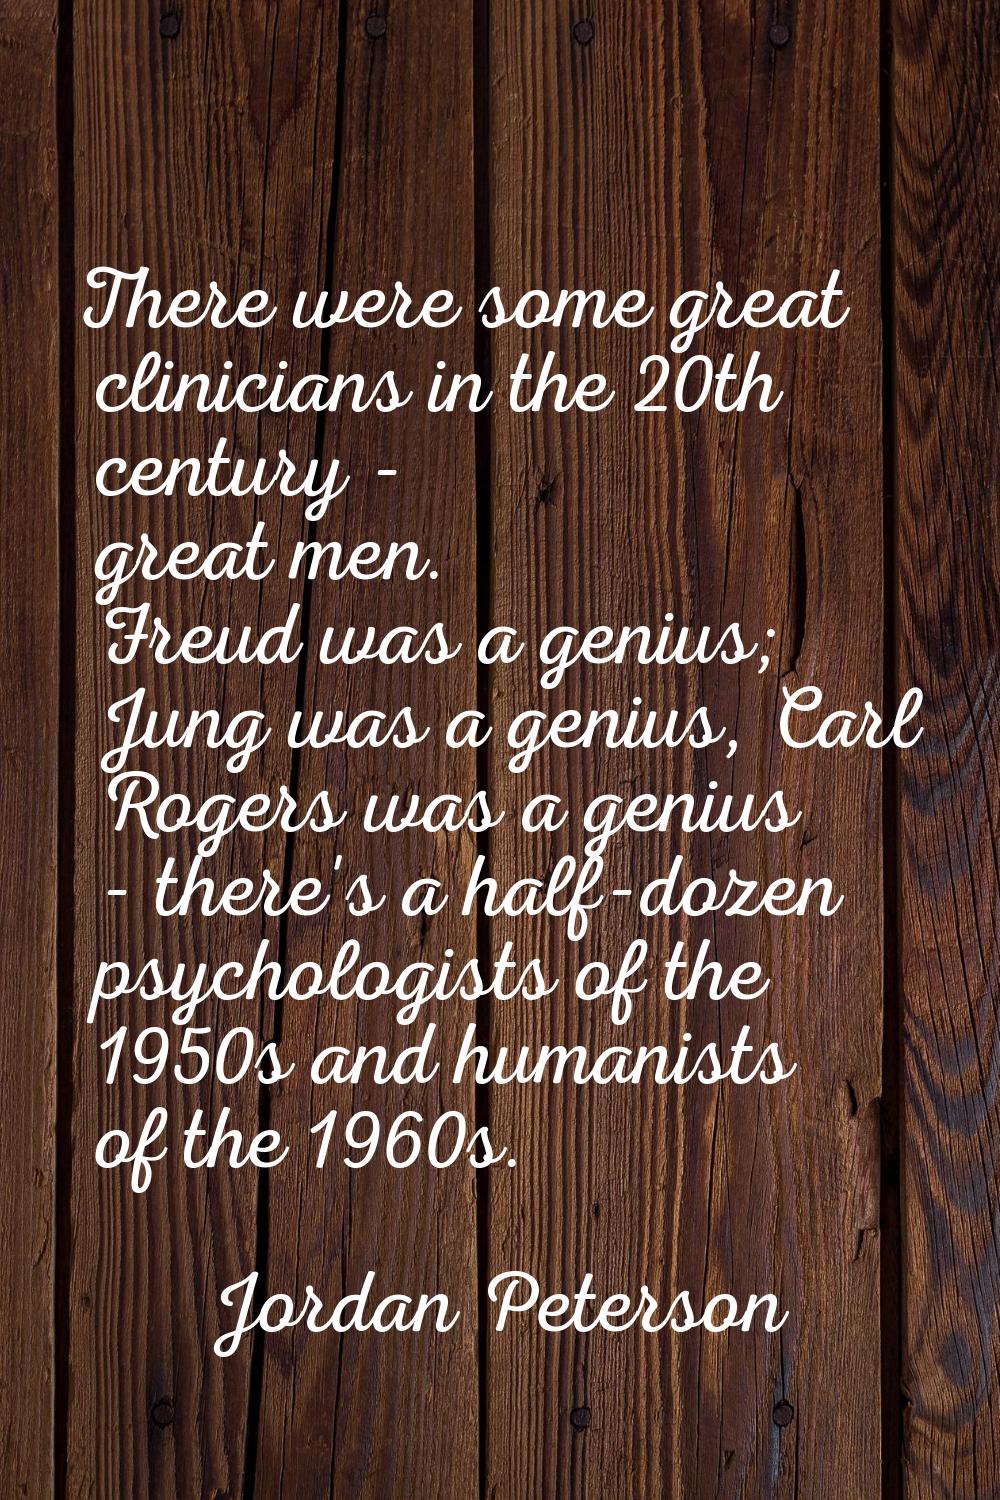 There were some great clinicians in the 20th century - great men. Freud was a genius; Jung was a ge